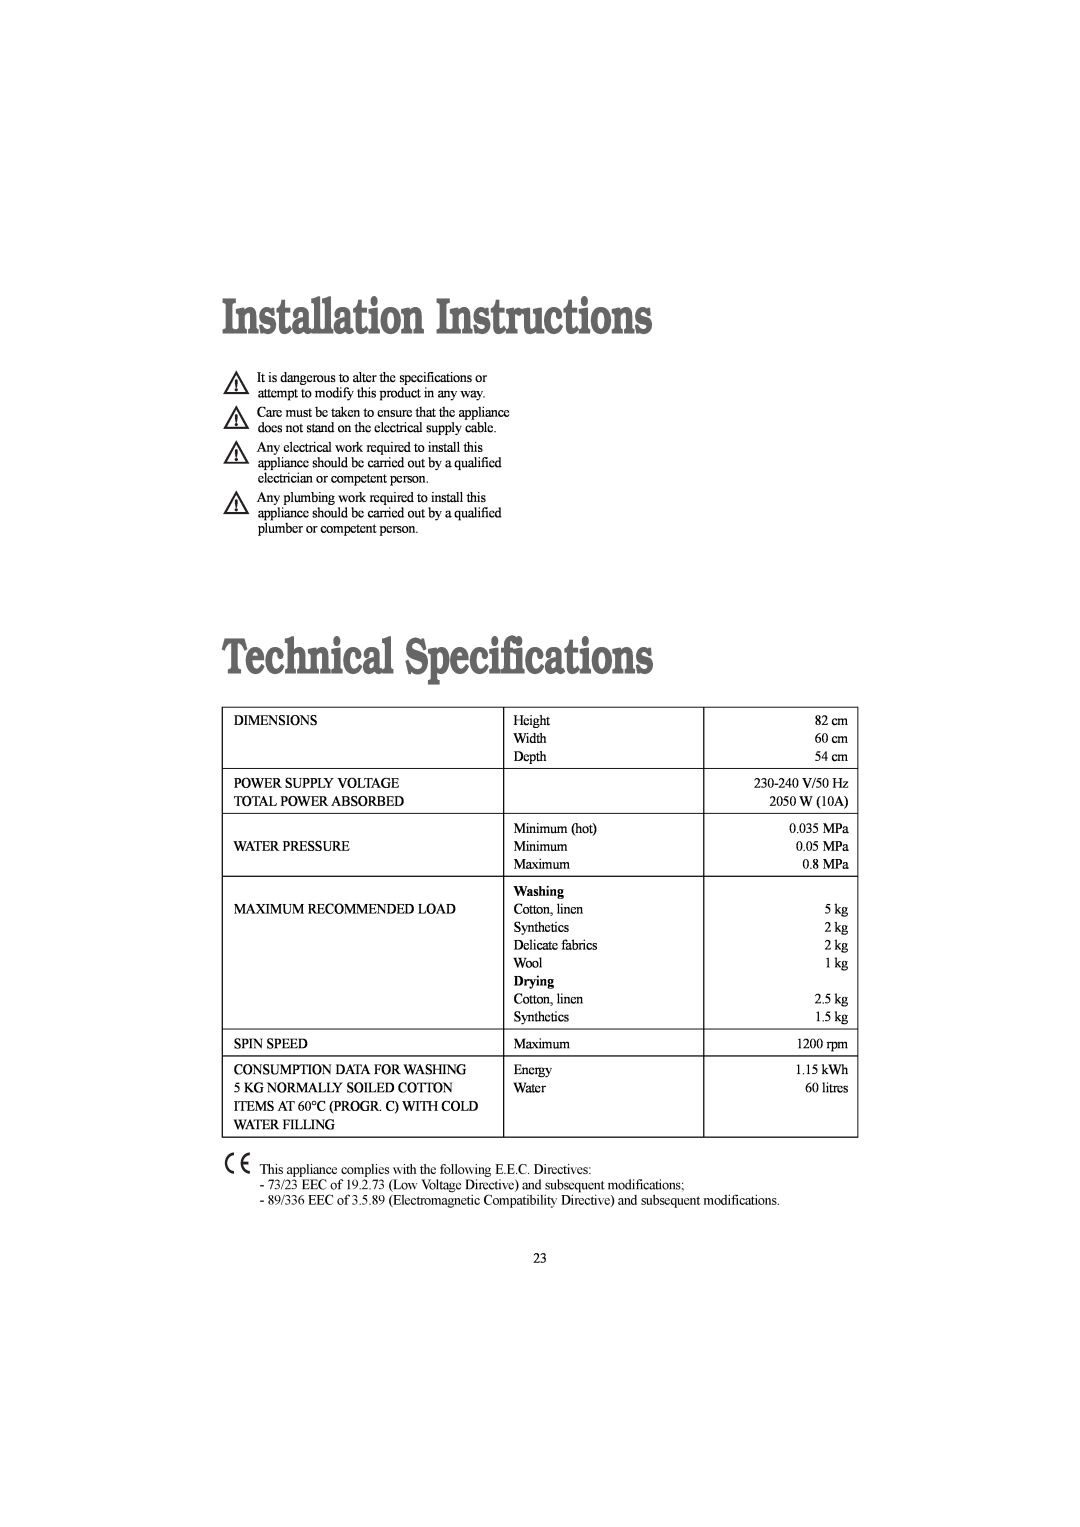 Electrolux EWD 1214 I manual Installation Instructions, Technical Specifications, Washing, Drying 